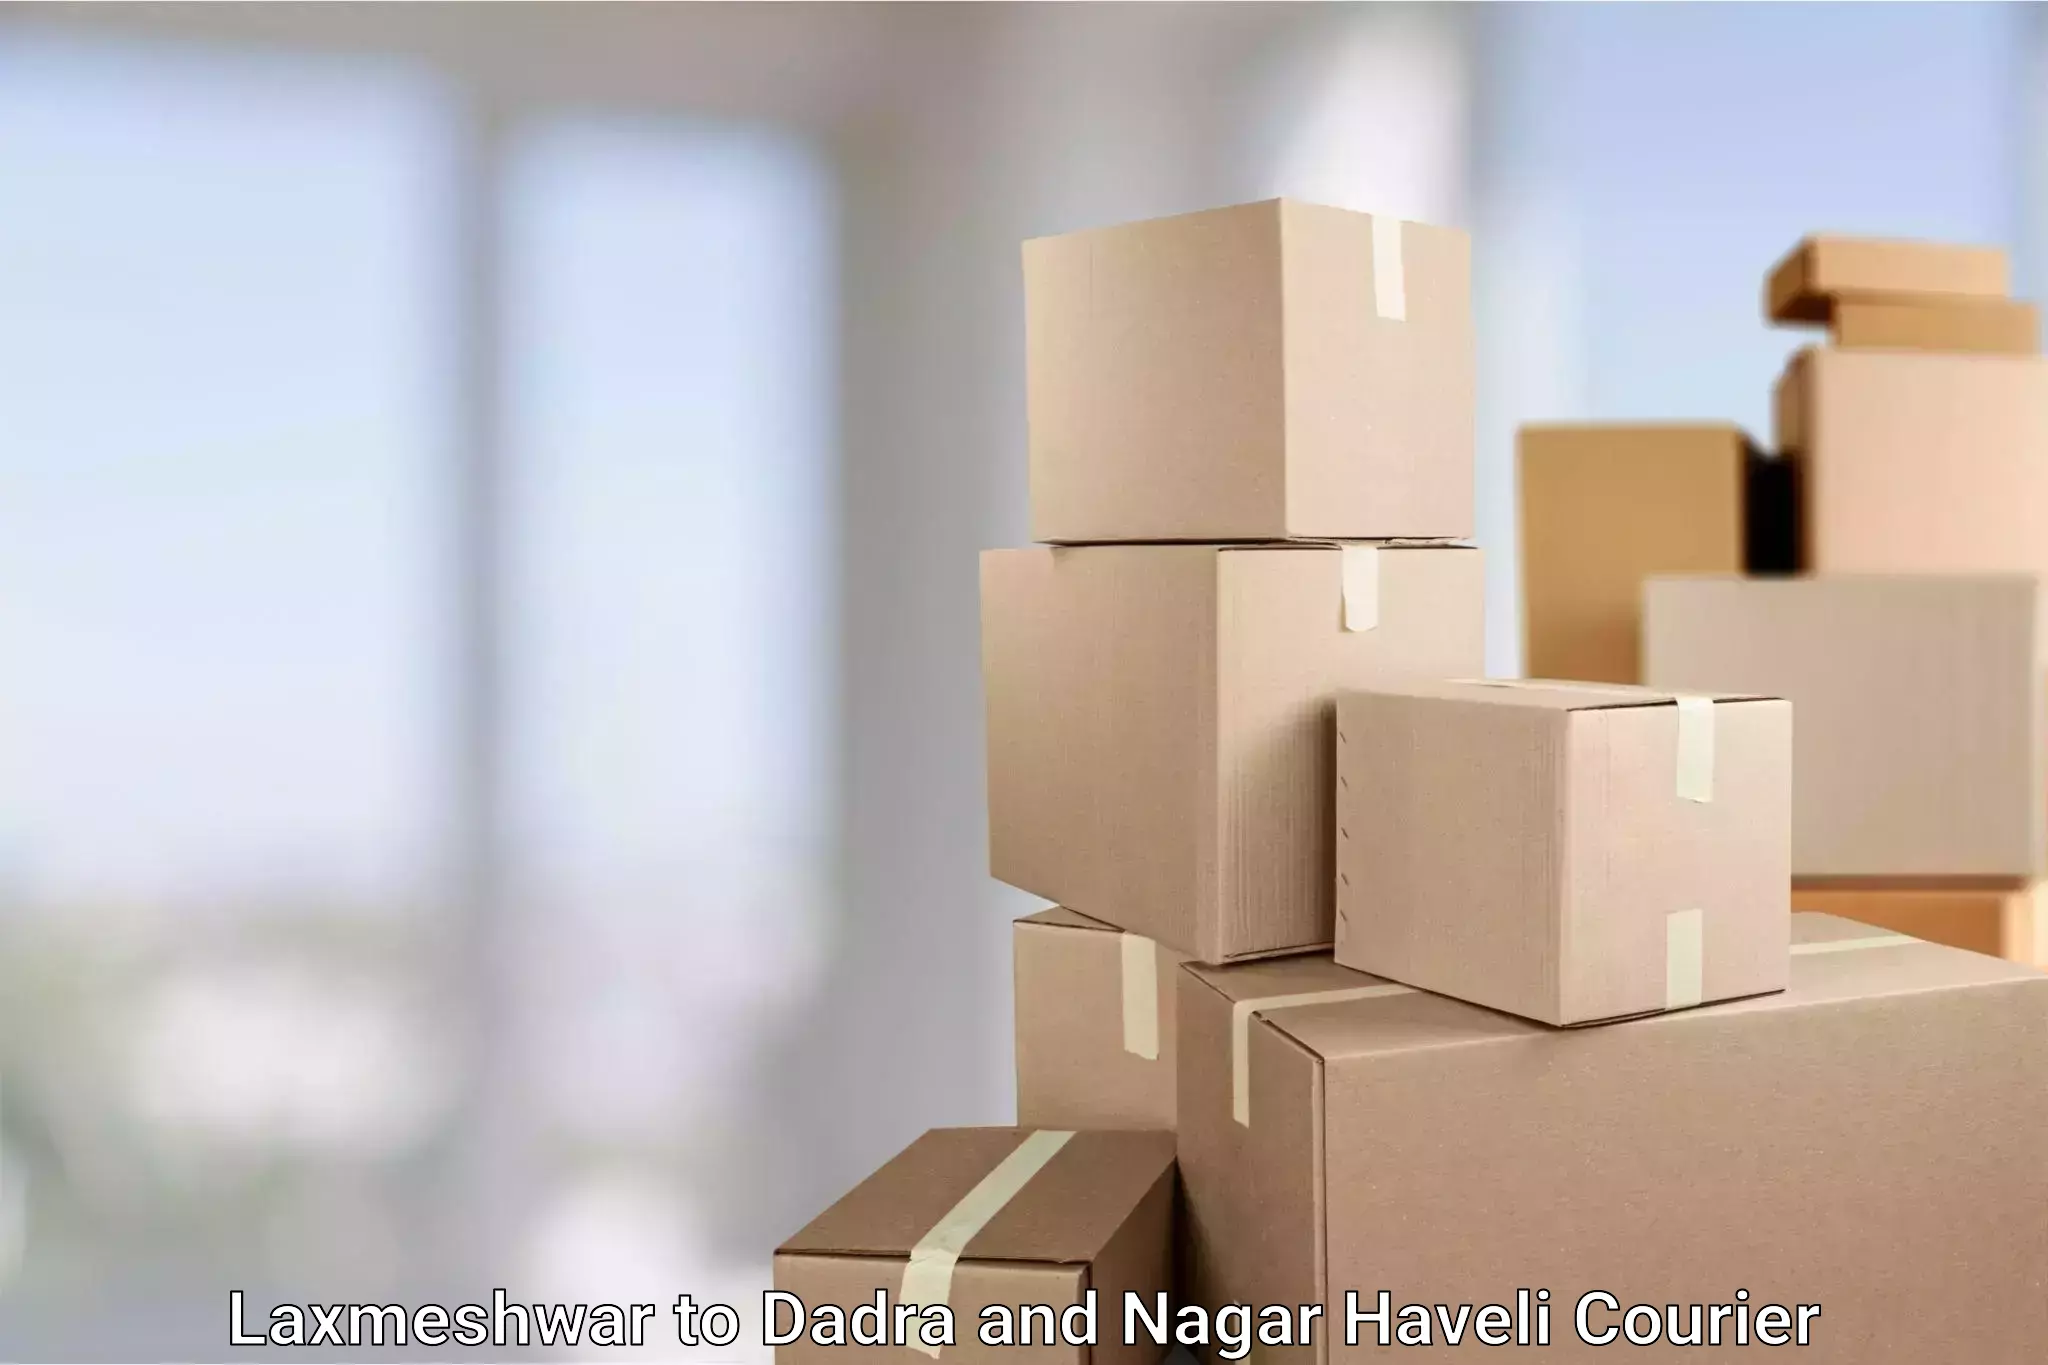 Round-the-clock parcel delivery Laxmeshwar to Dadra and Nagar Haveli